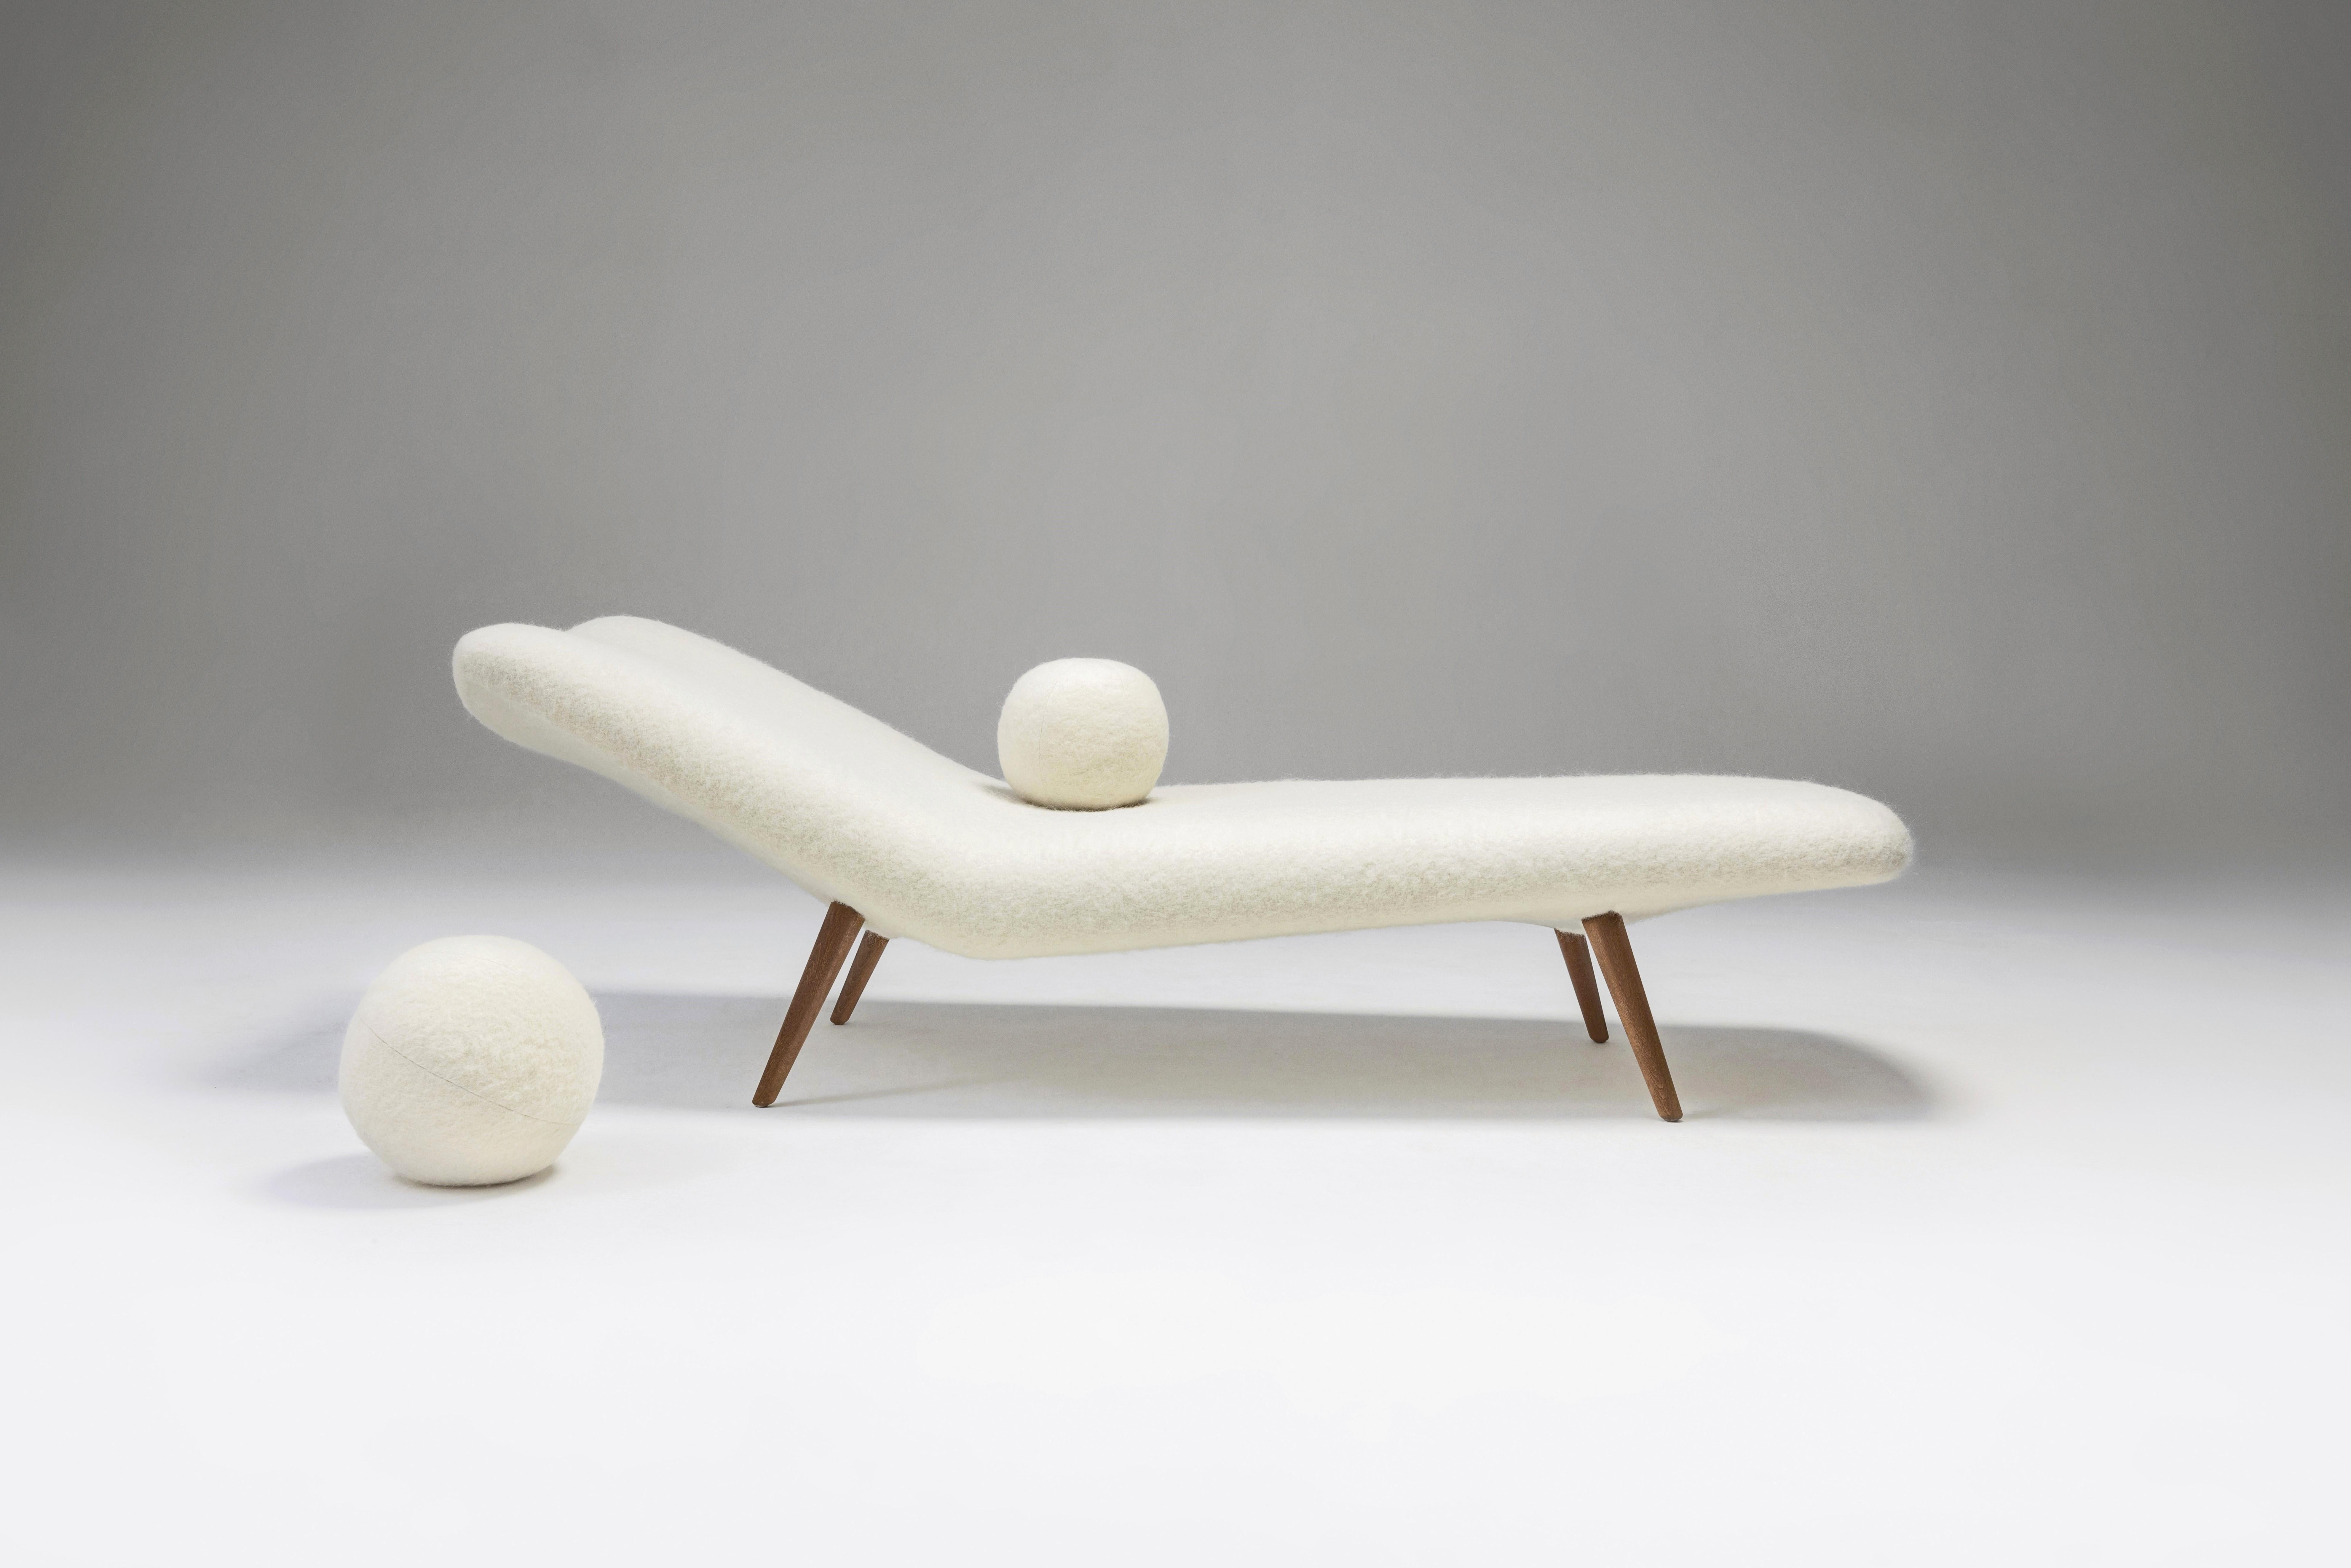 This Mid-Century Modern daybed was designed by Theo Ruth in 1947 and produced by Eugen Schmidt Soloform, Artifort in a limited series.

That is a veritable reflection of the spectacularity, quality and comfort in the material world. The sublime